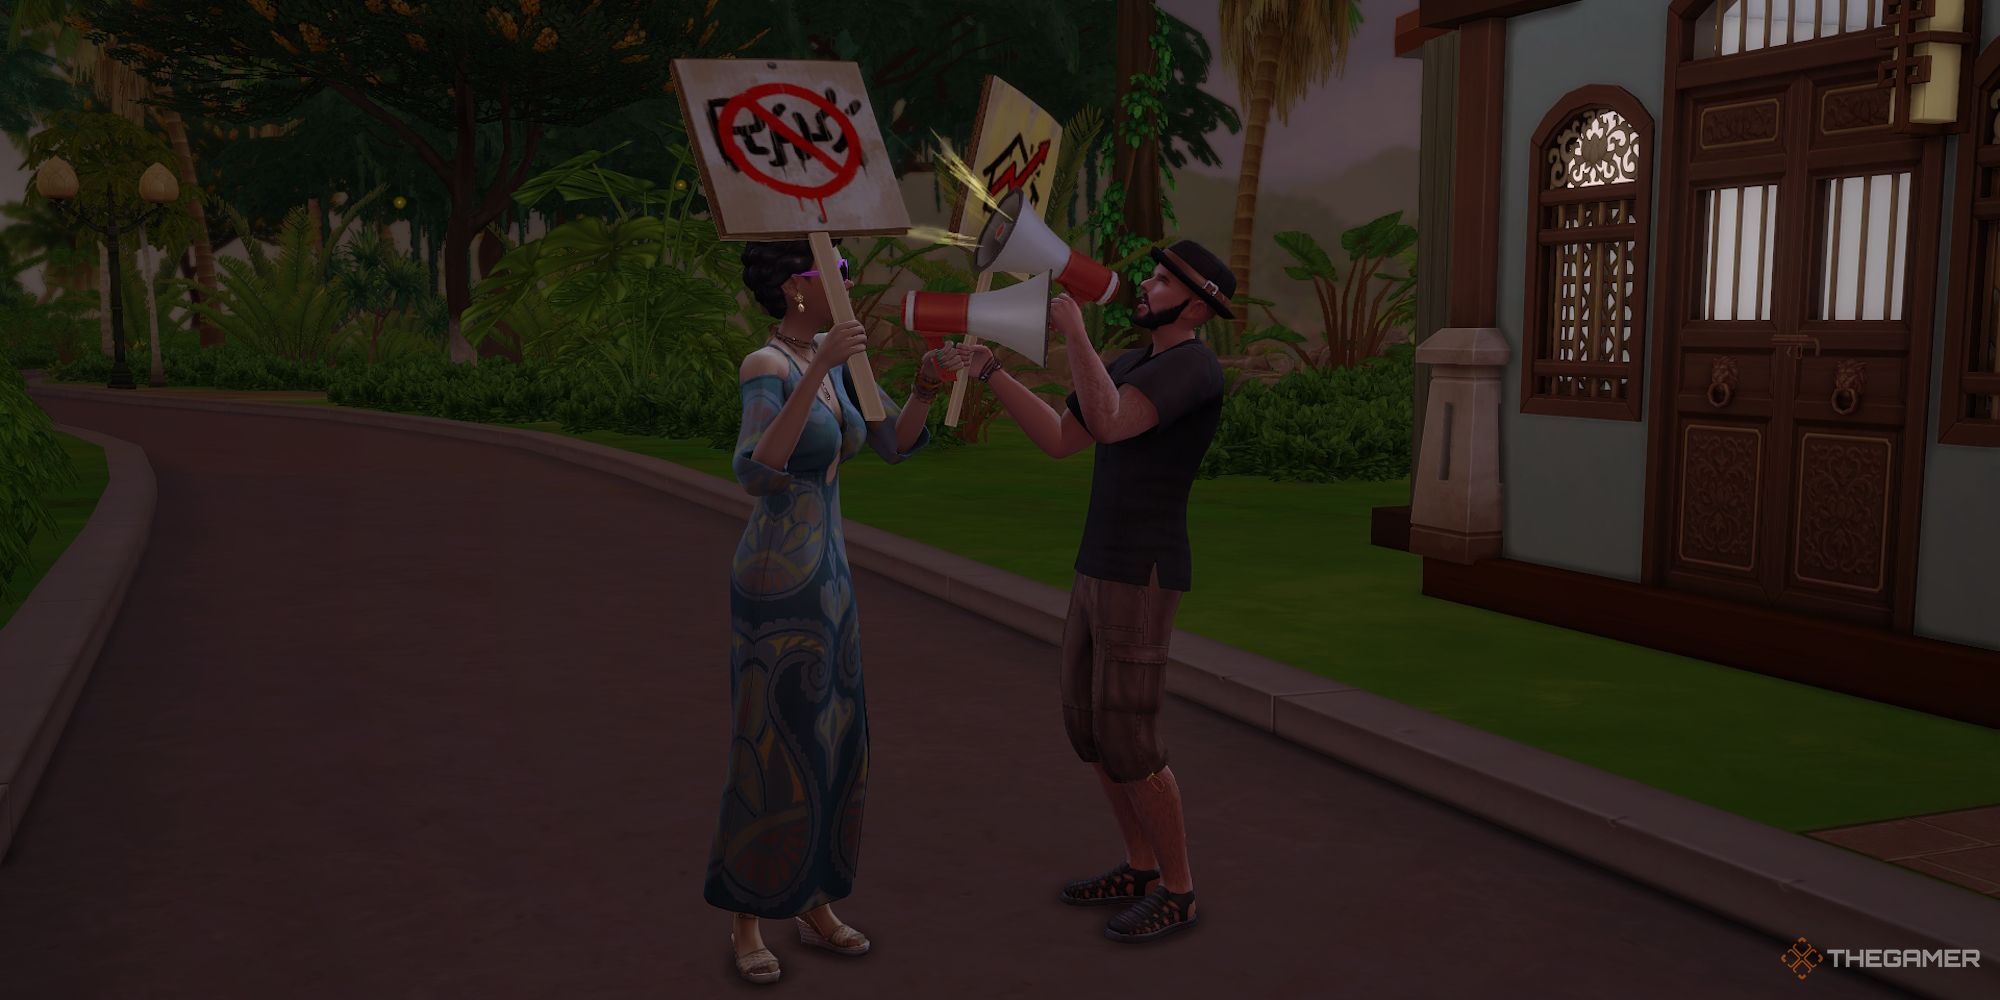 Two Sims revolting against poor living conditions outside